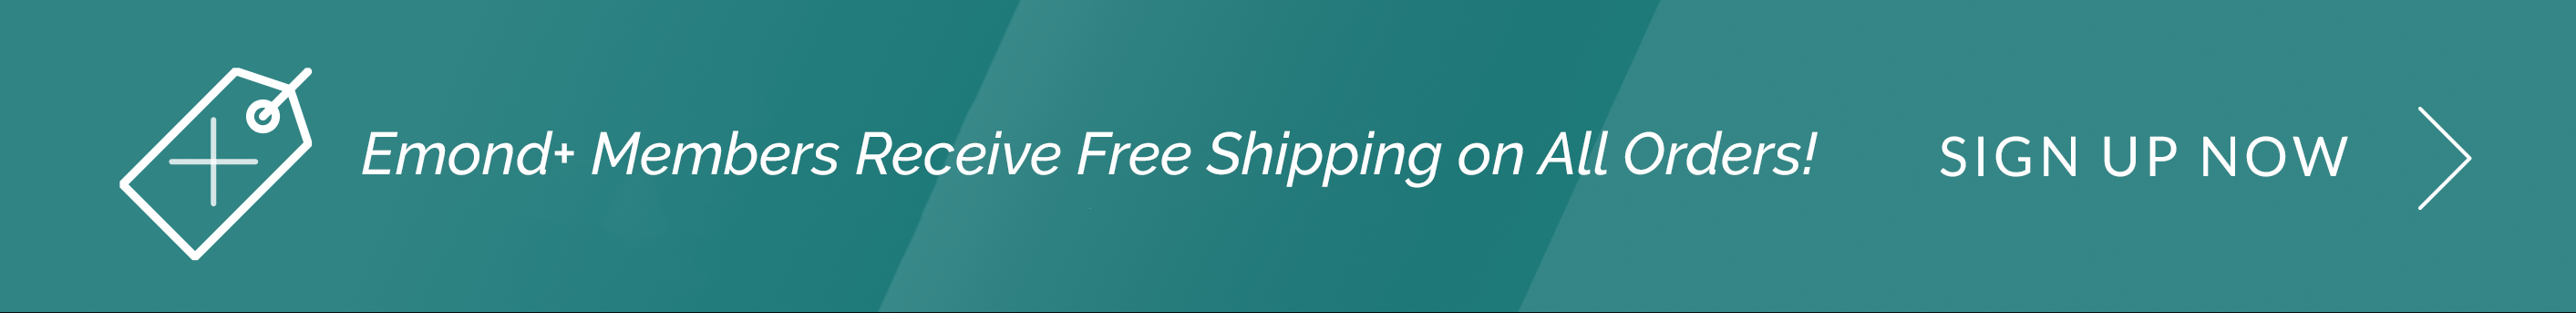 Emond+ Members receive Free Shipping on All Orders